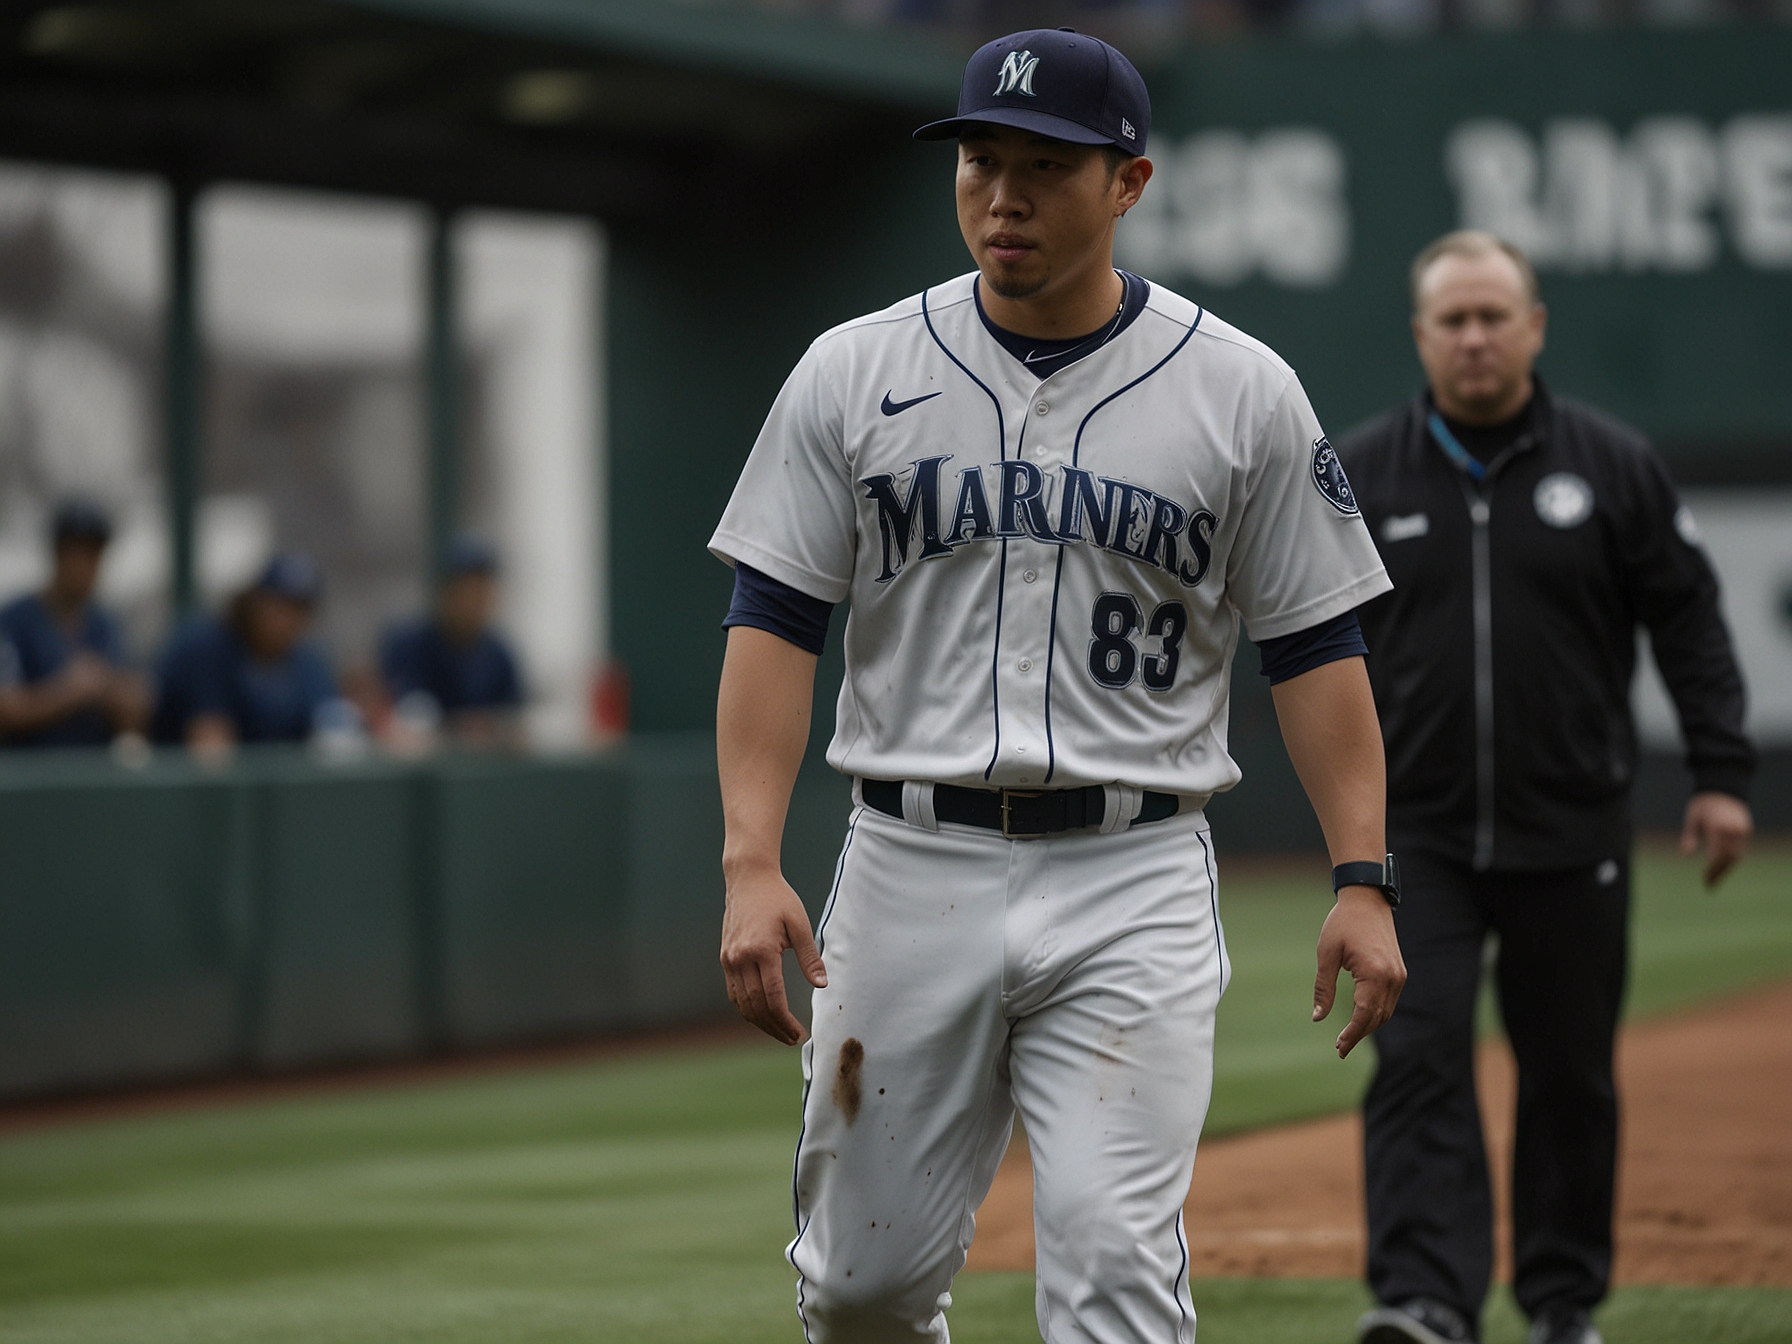 Bryan Woo, in Mariners uniform, is seen grimacing as he clutches his right hamstring while walking off the field with the help of medical staff during the fourth inning of a crucial game.